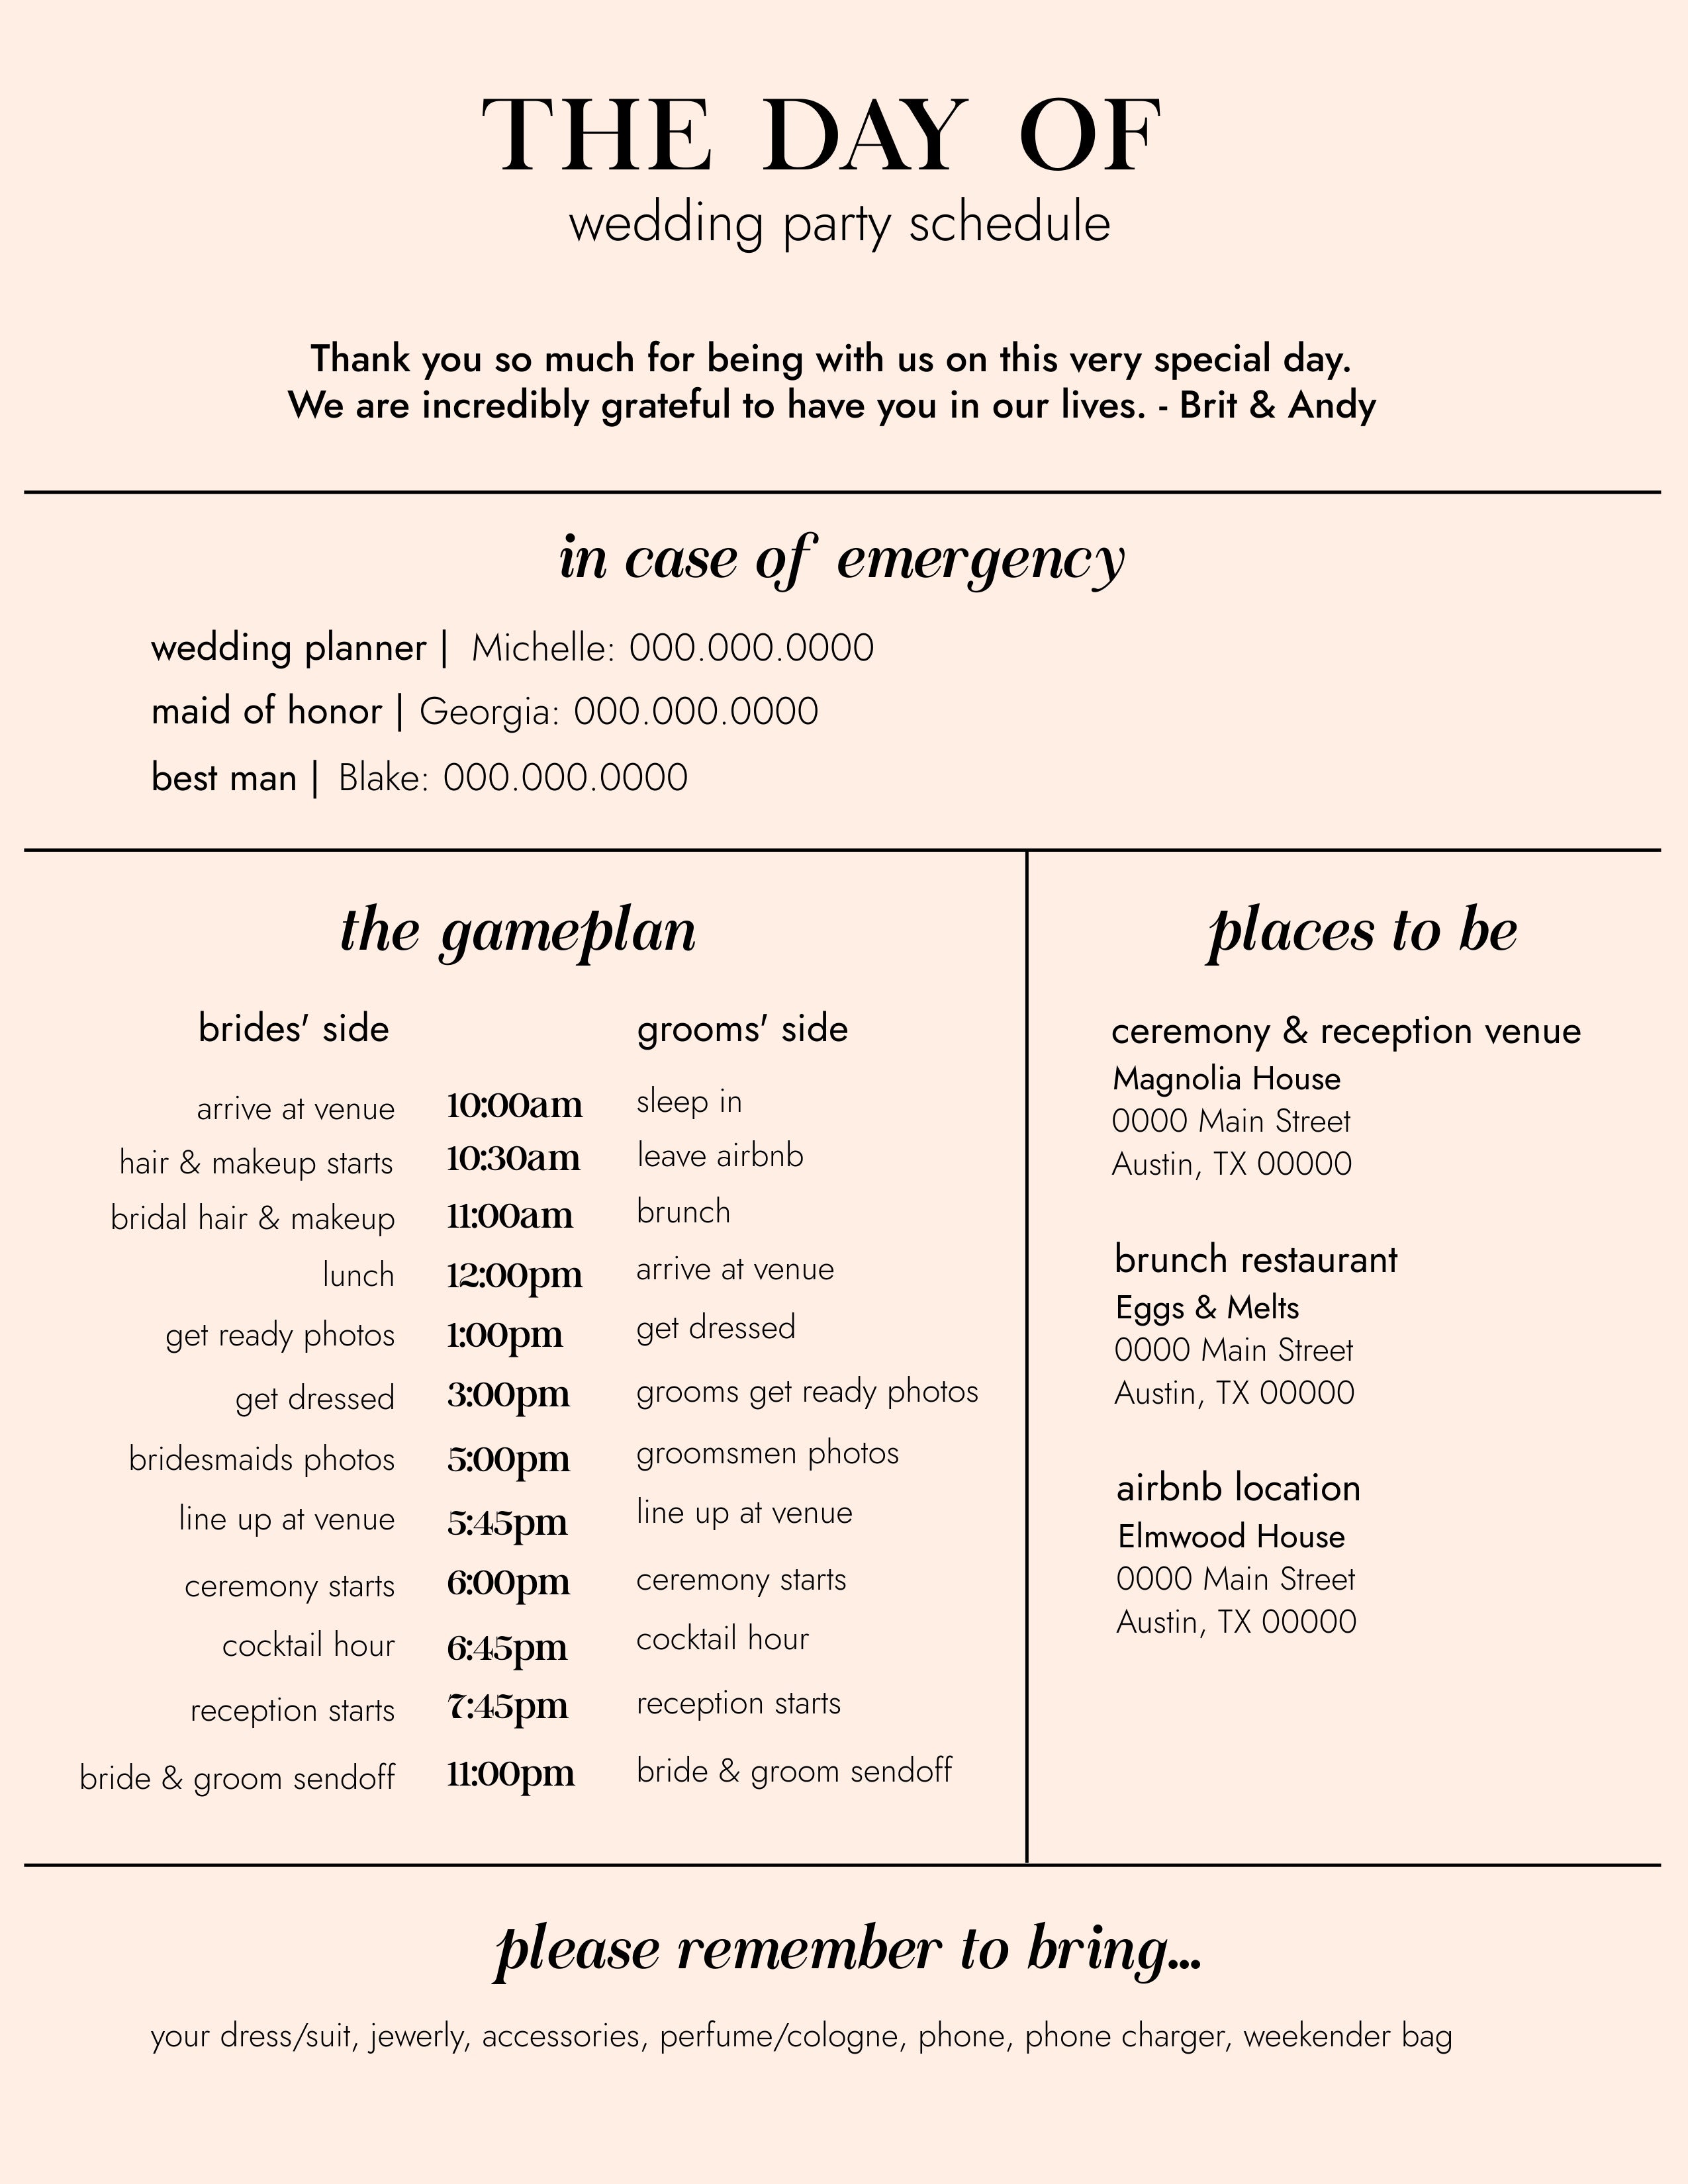 WEDDING PARTY SCHEDULE EDITABLE TEMPLATE Our Day Of